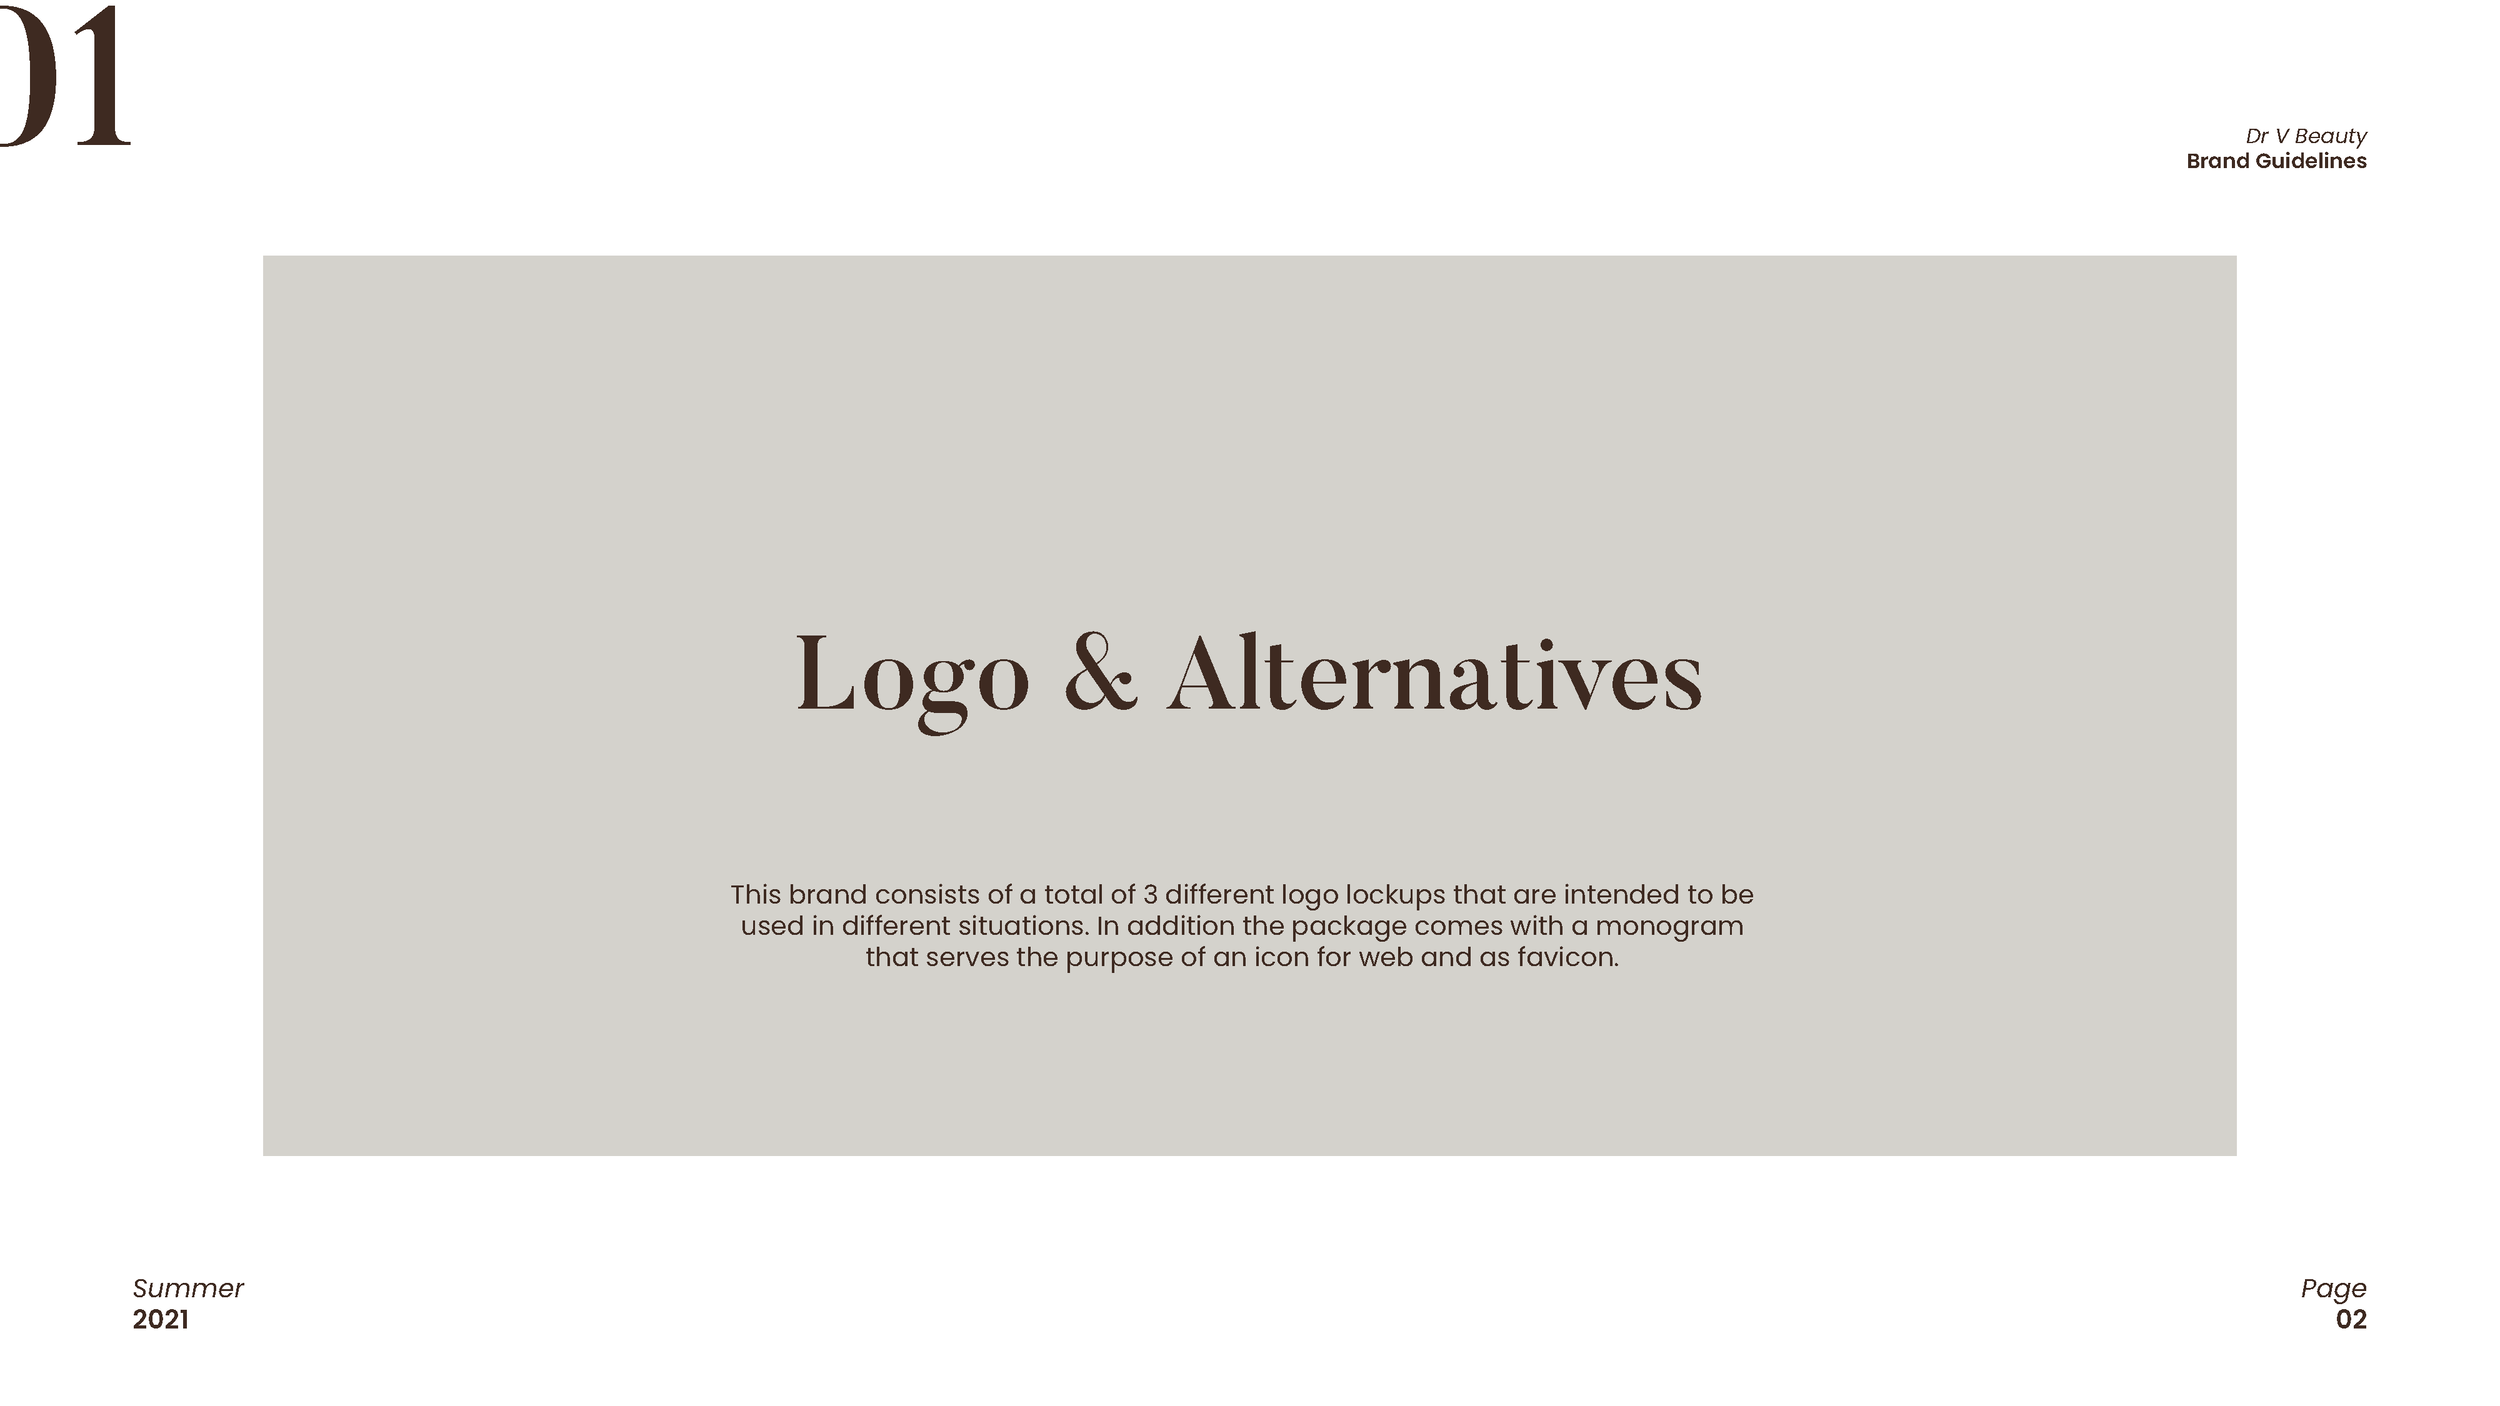 Dr V Beauty - Brand Guidelines_Page_02.png